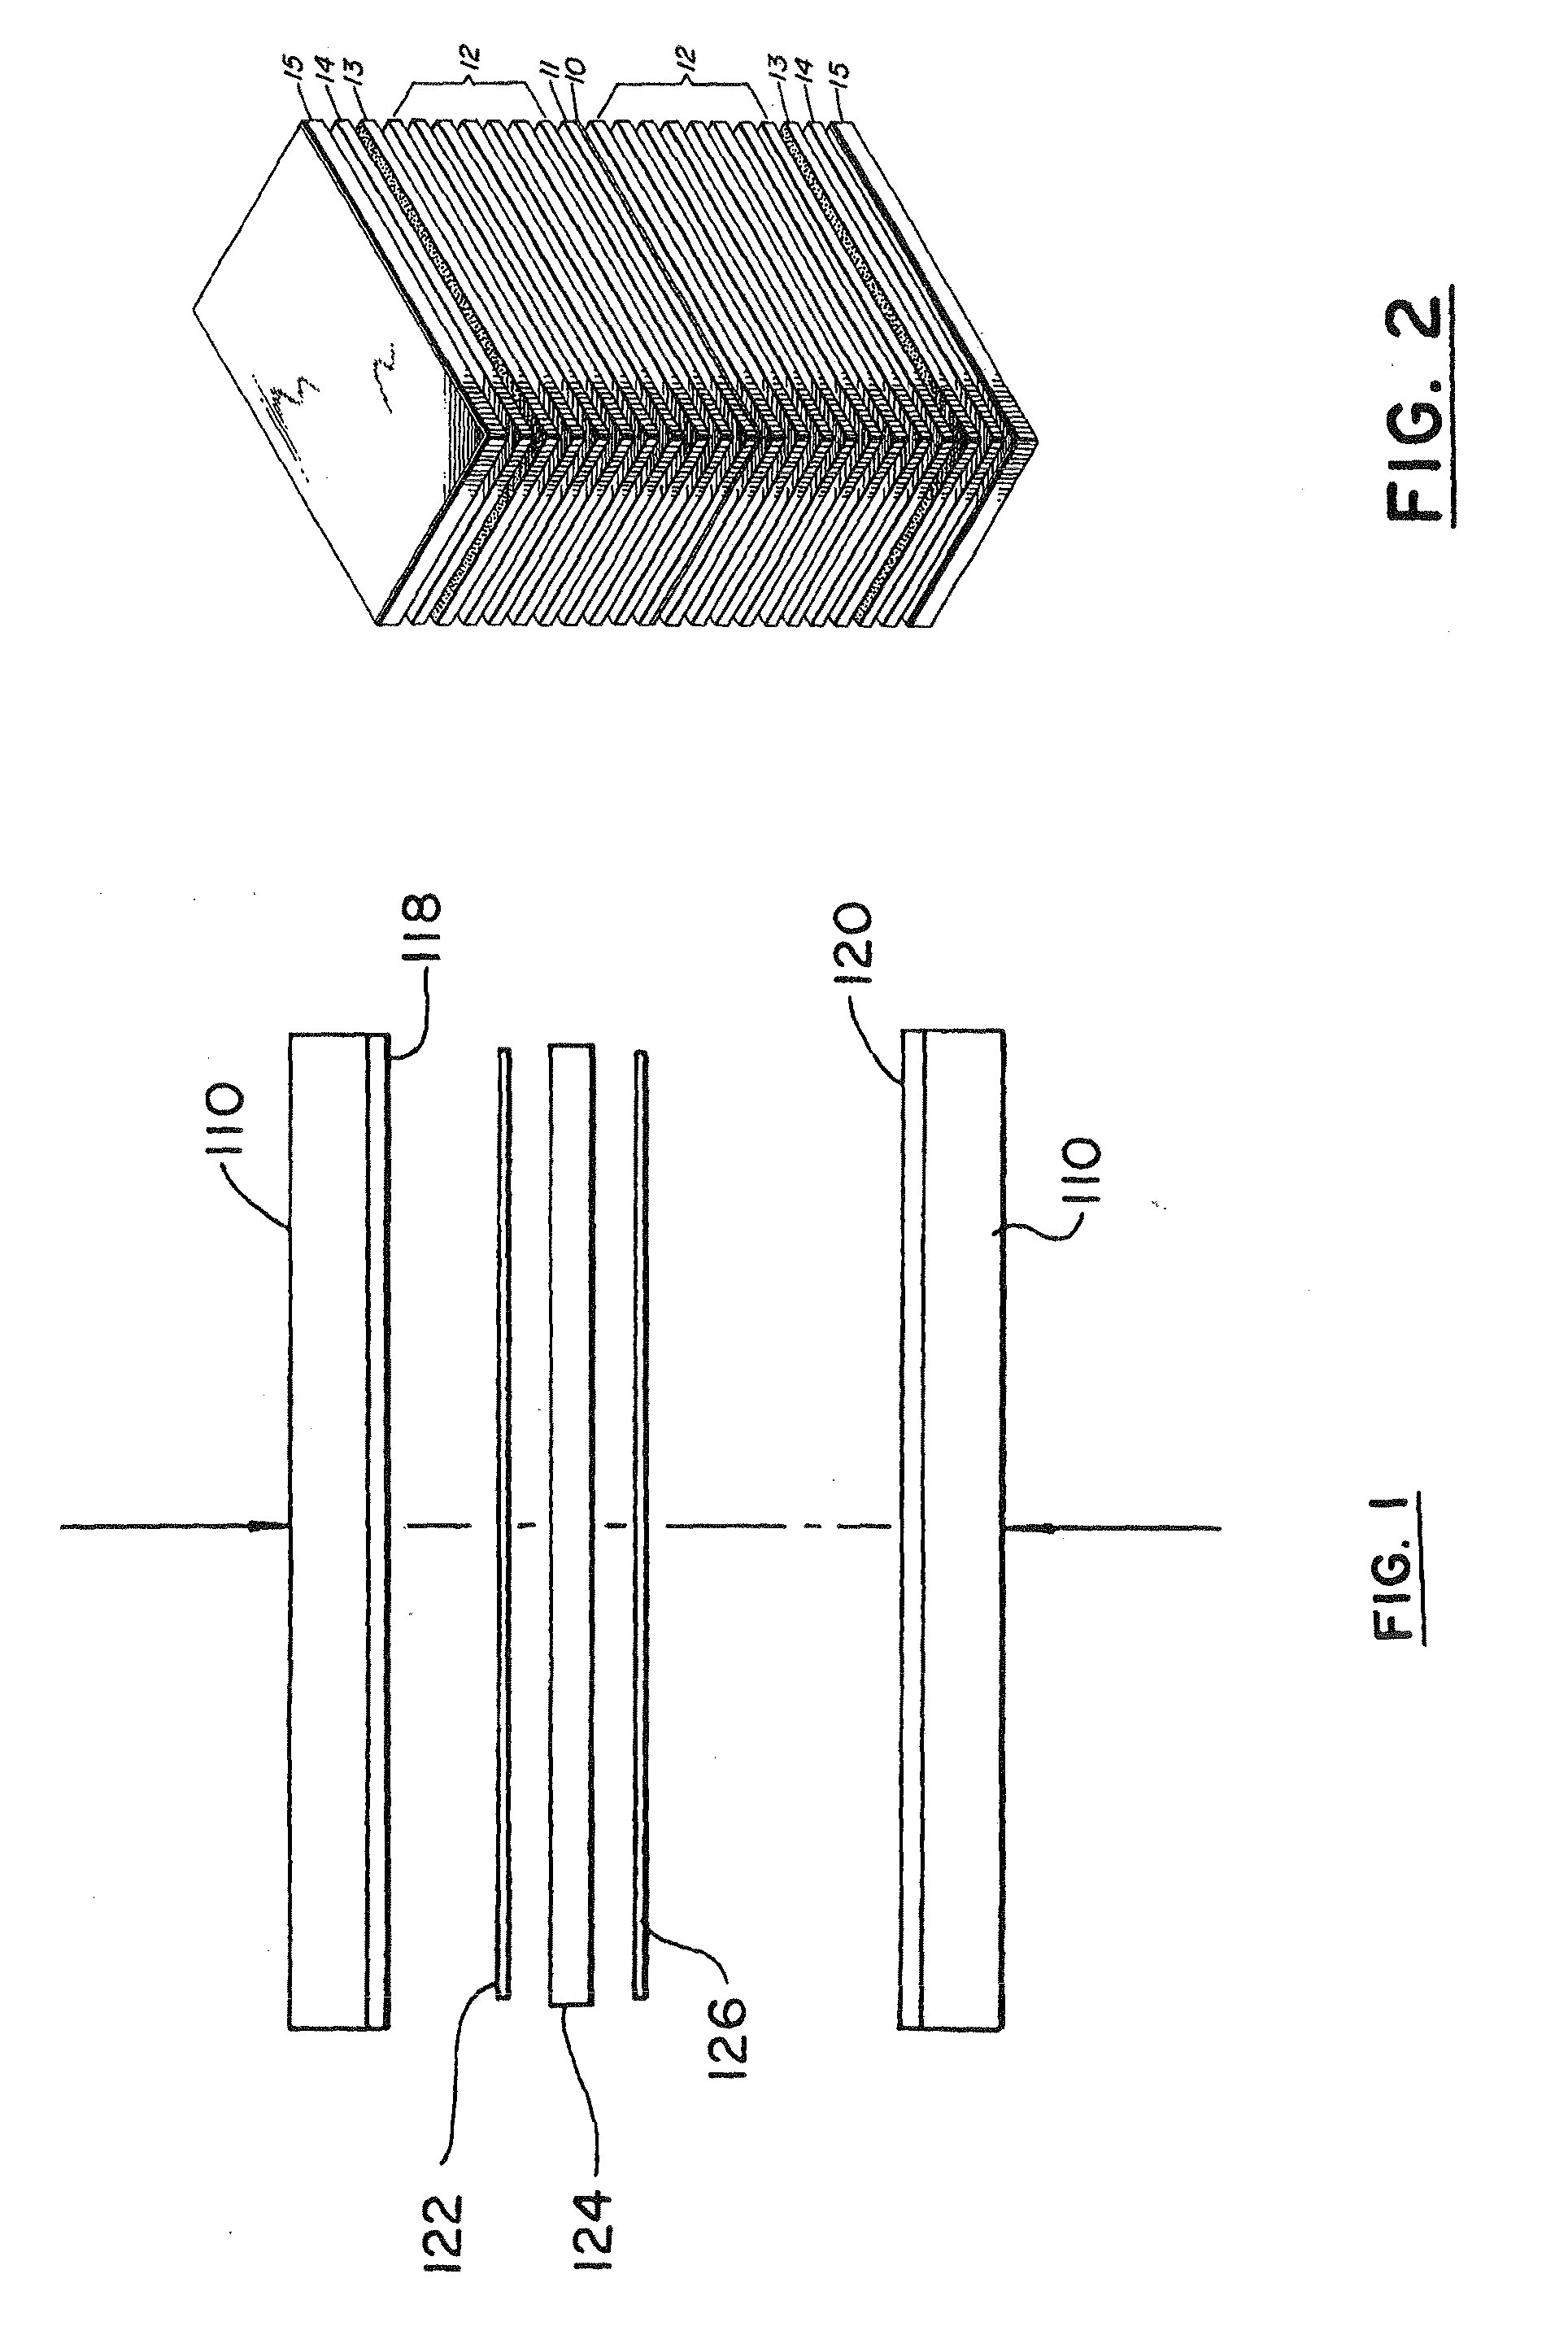 Process of providing press plates with a flouro-polymer impregnated hard coating